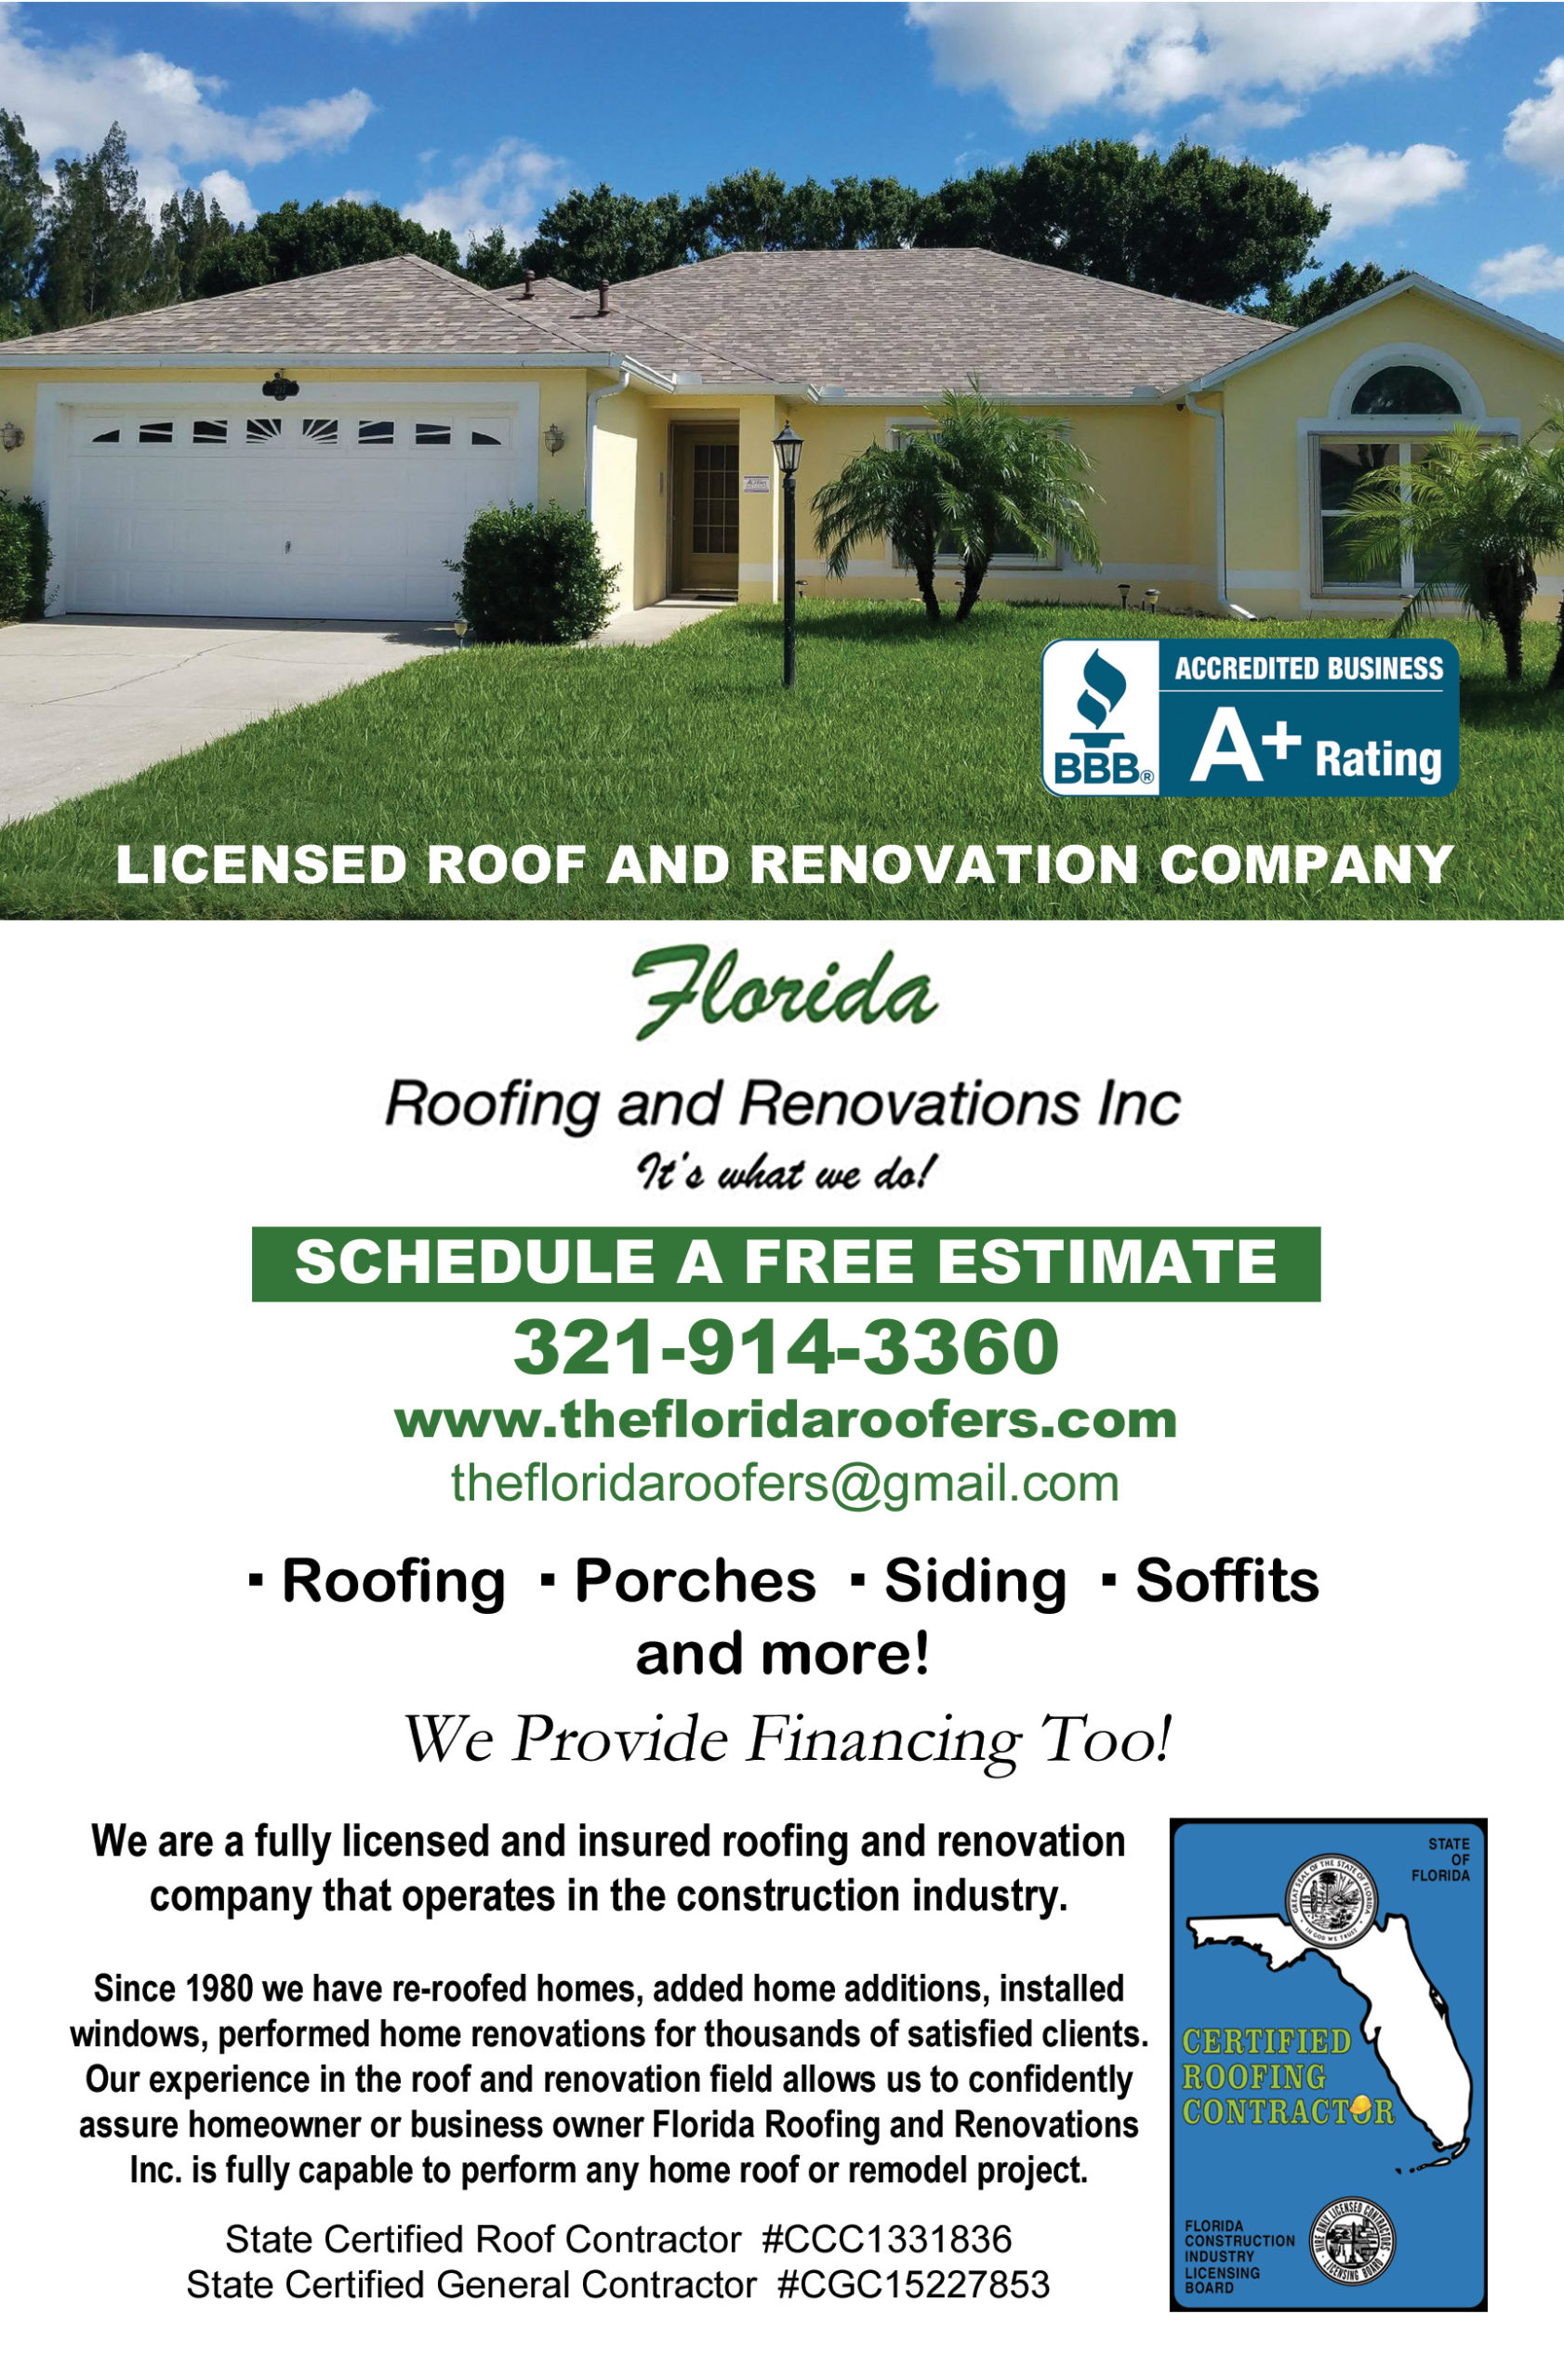 Florida Roofing Renovations Ad